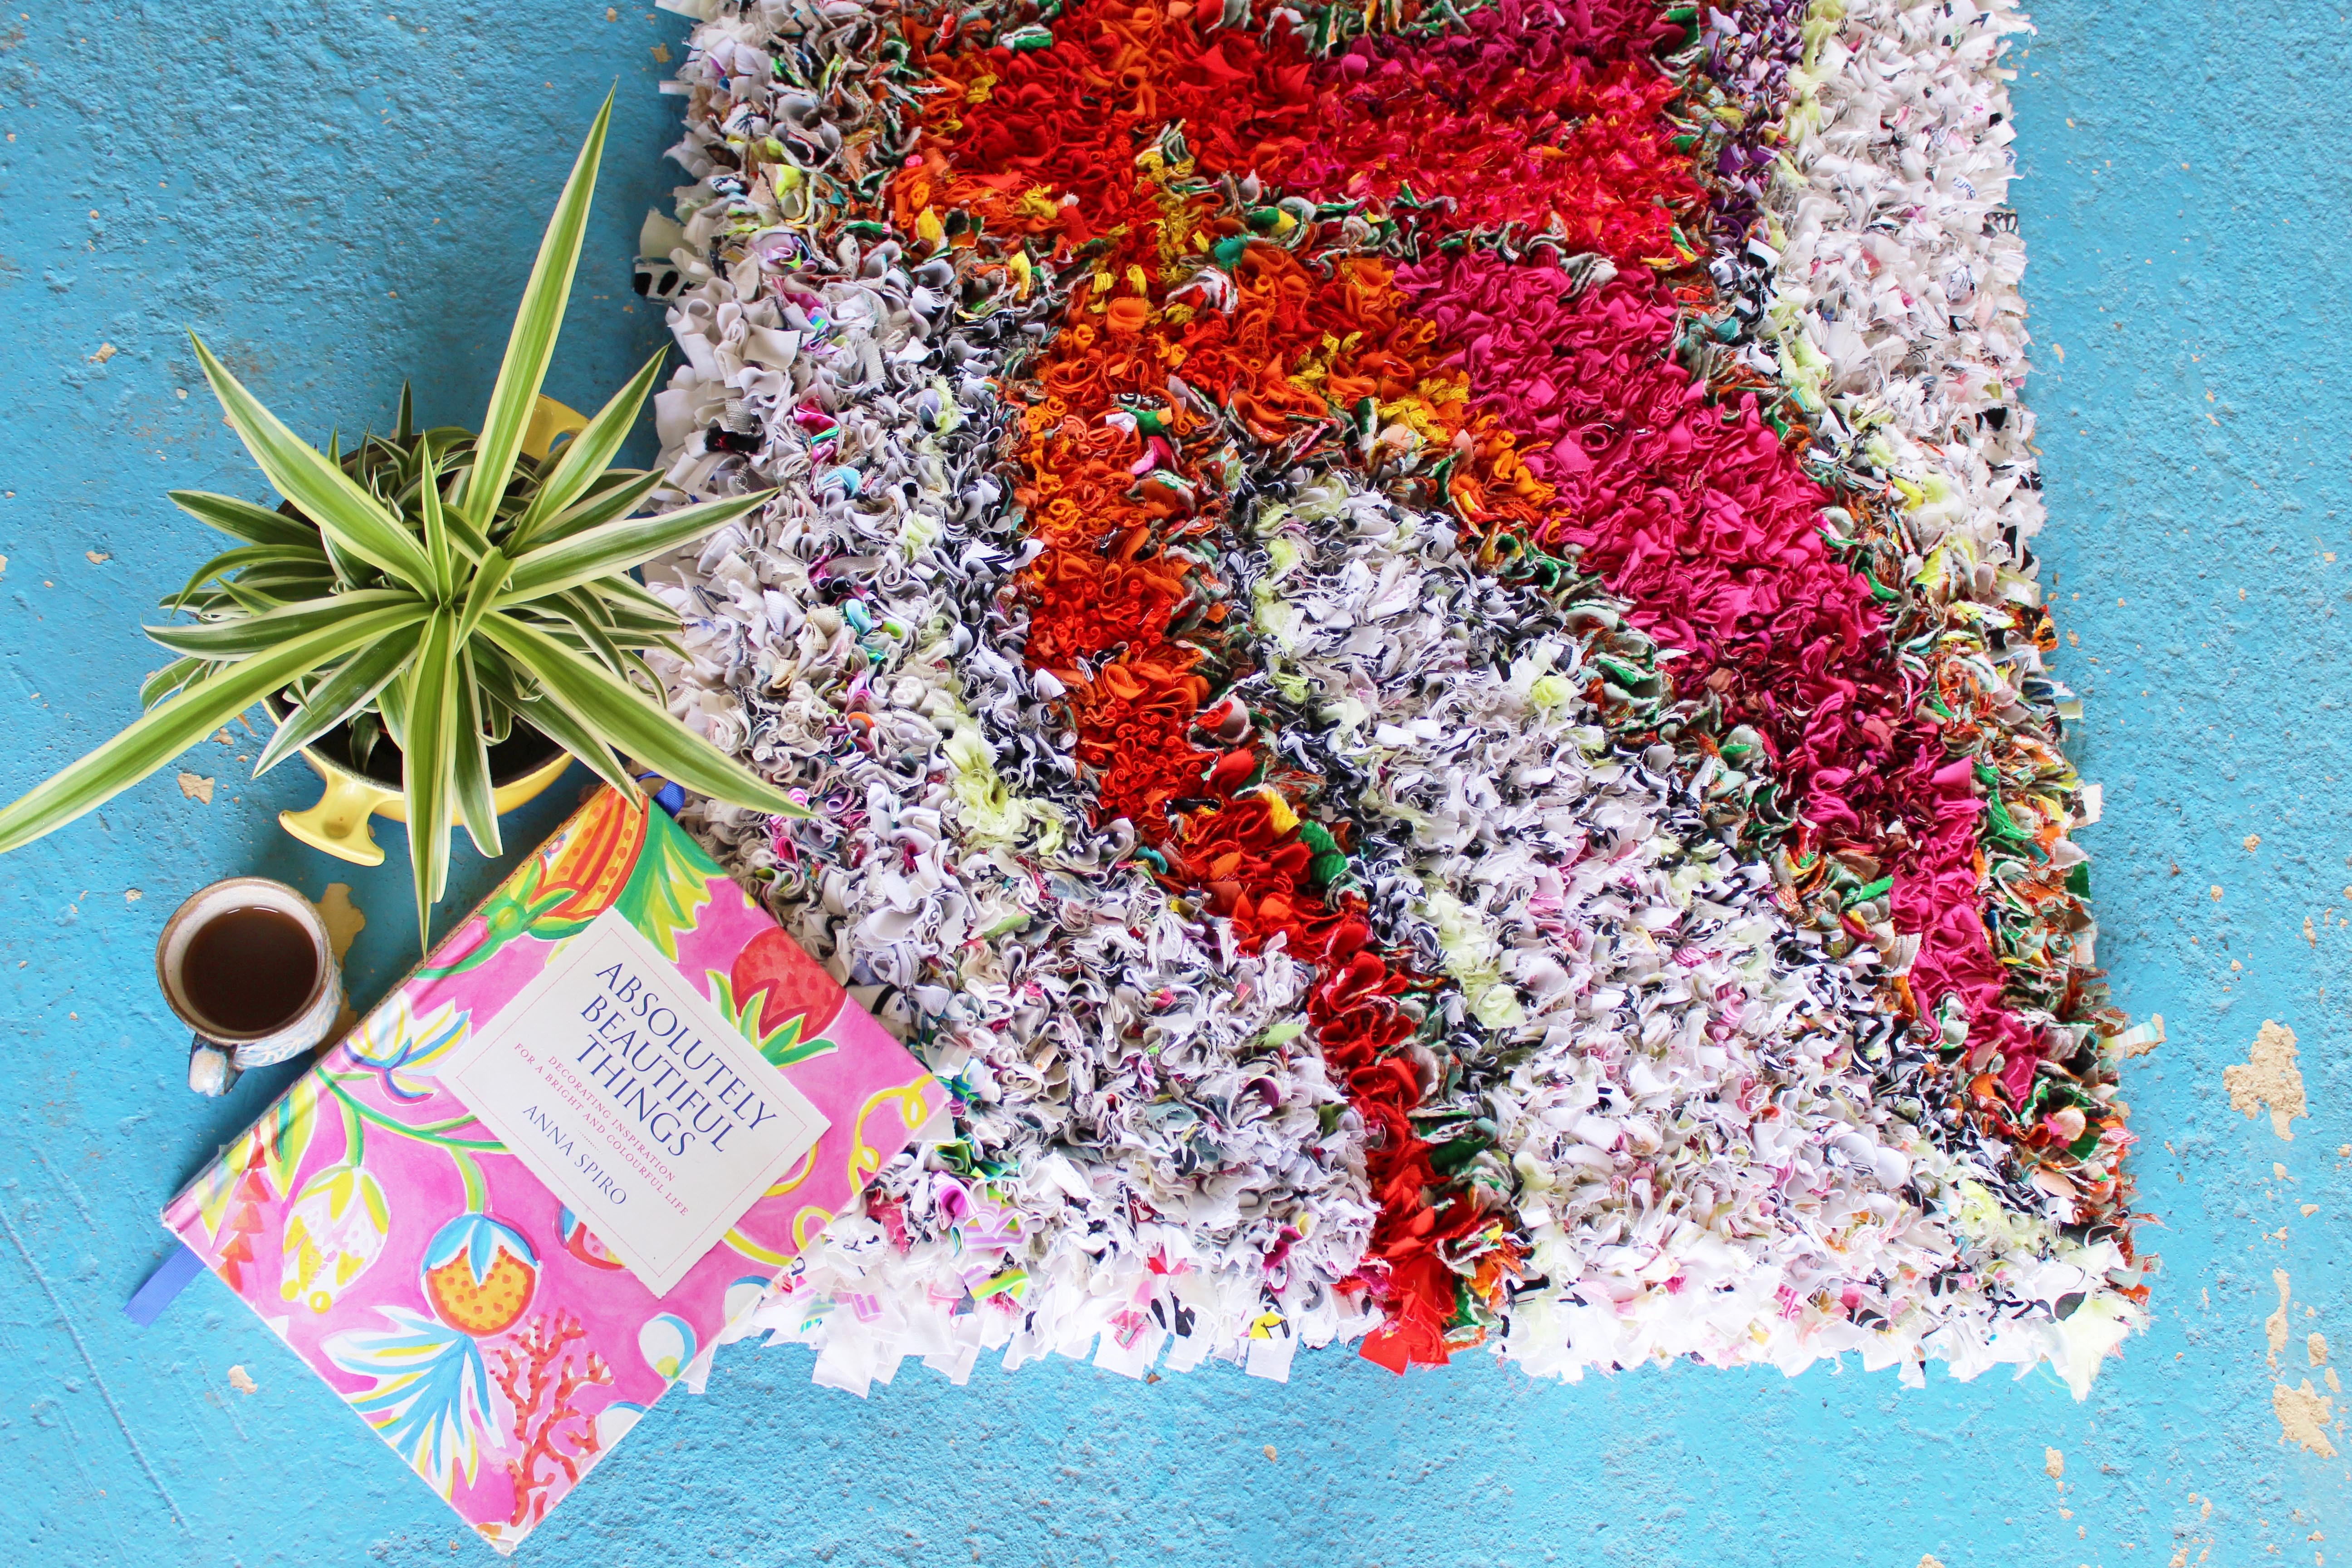 Absolutely Beautiful Things Book by Anna Spiro on top of a Rag Rug with a Palm and coffee